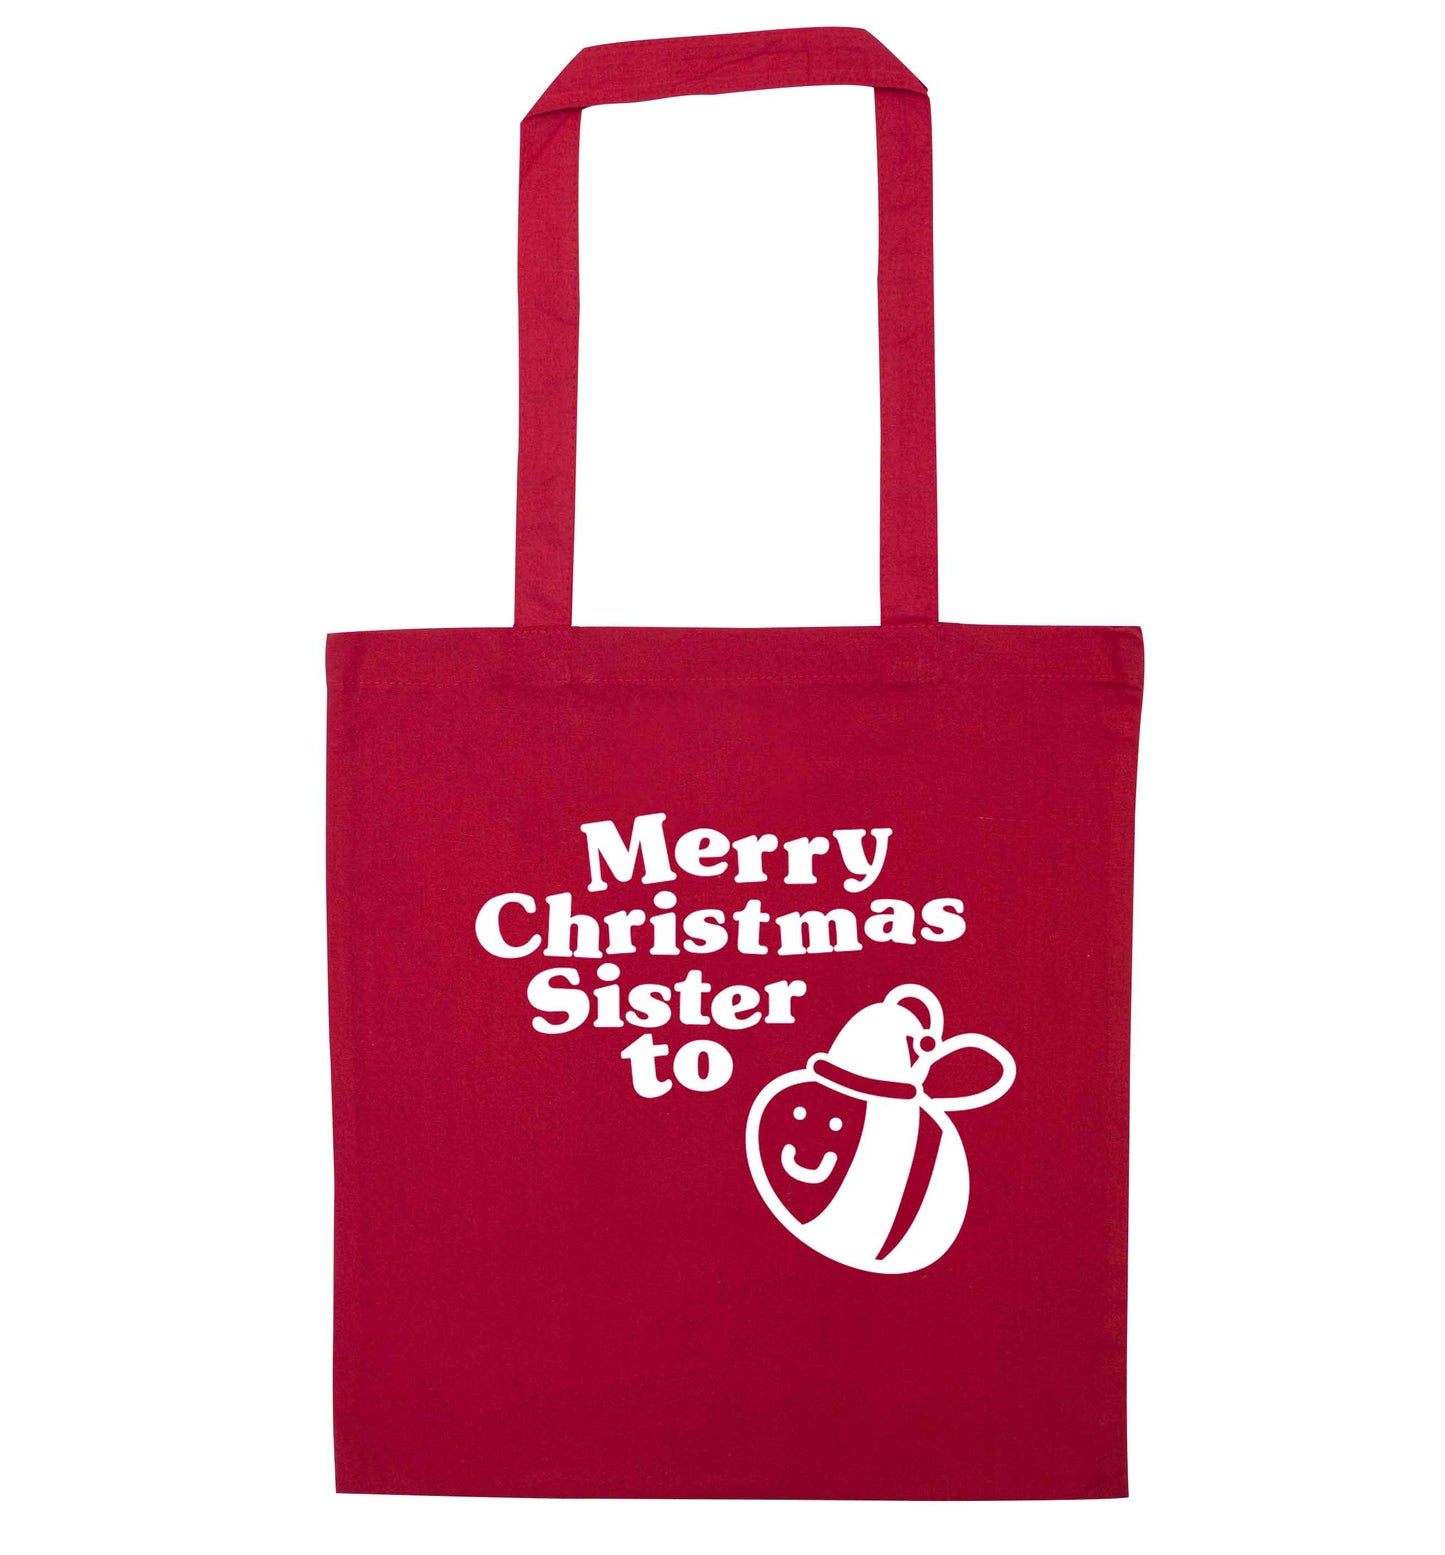 Merry Christmas sister to be red tote bag